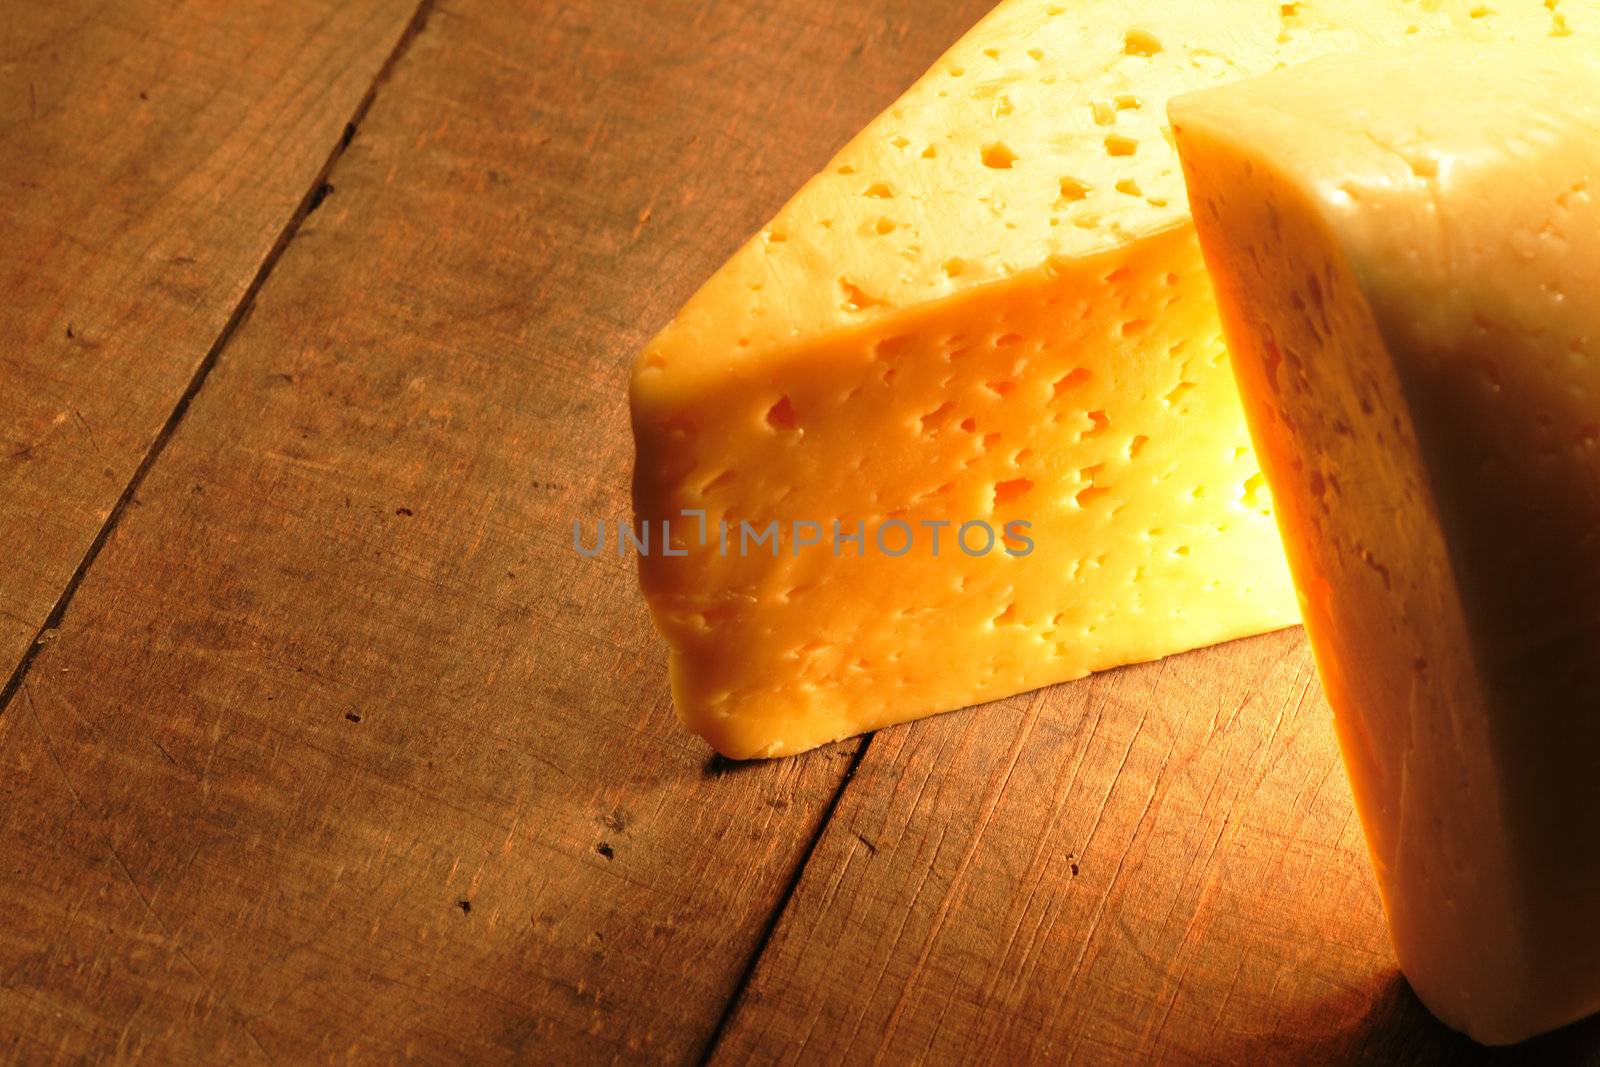 Two cheese pieces lying on wooden board. Nice lighting effect and copy space